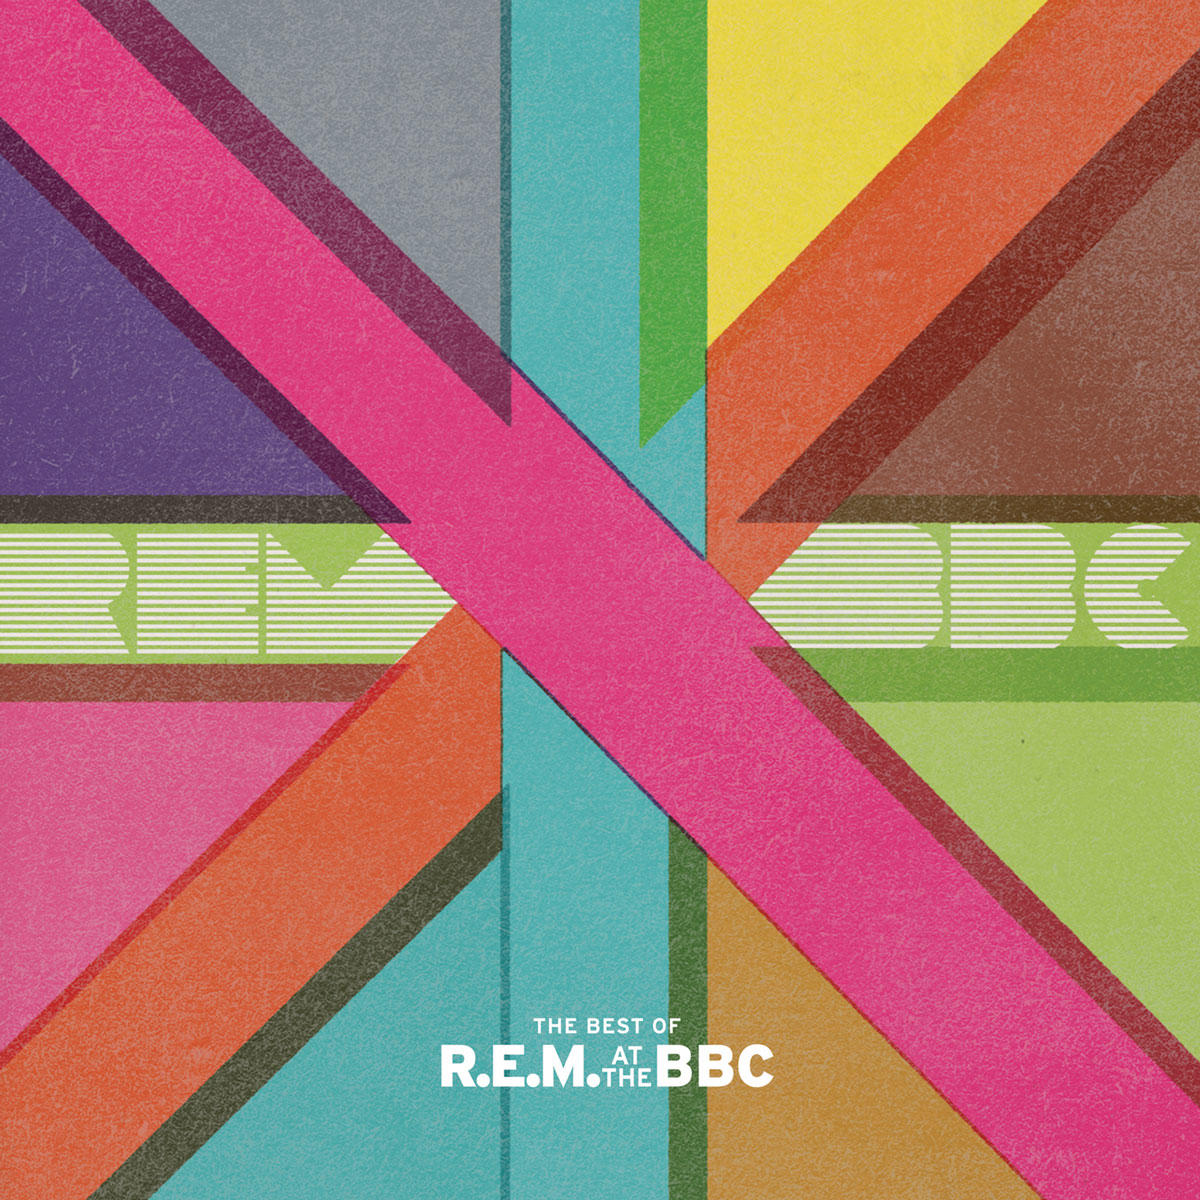 The BBC At Of The - - (CD) R.E.M. Best R.E.M.